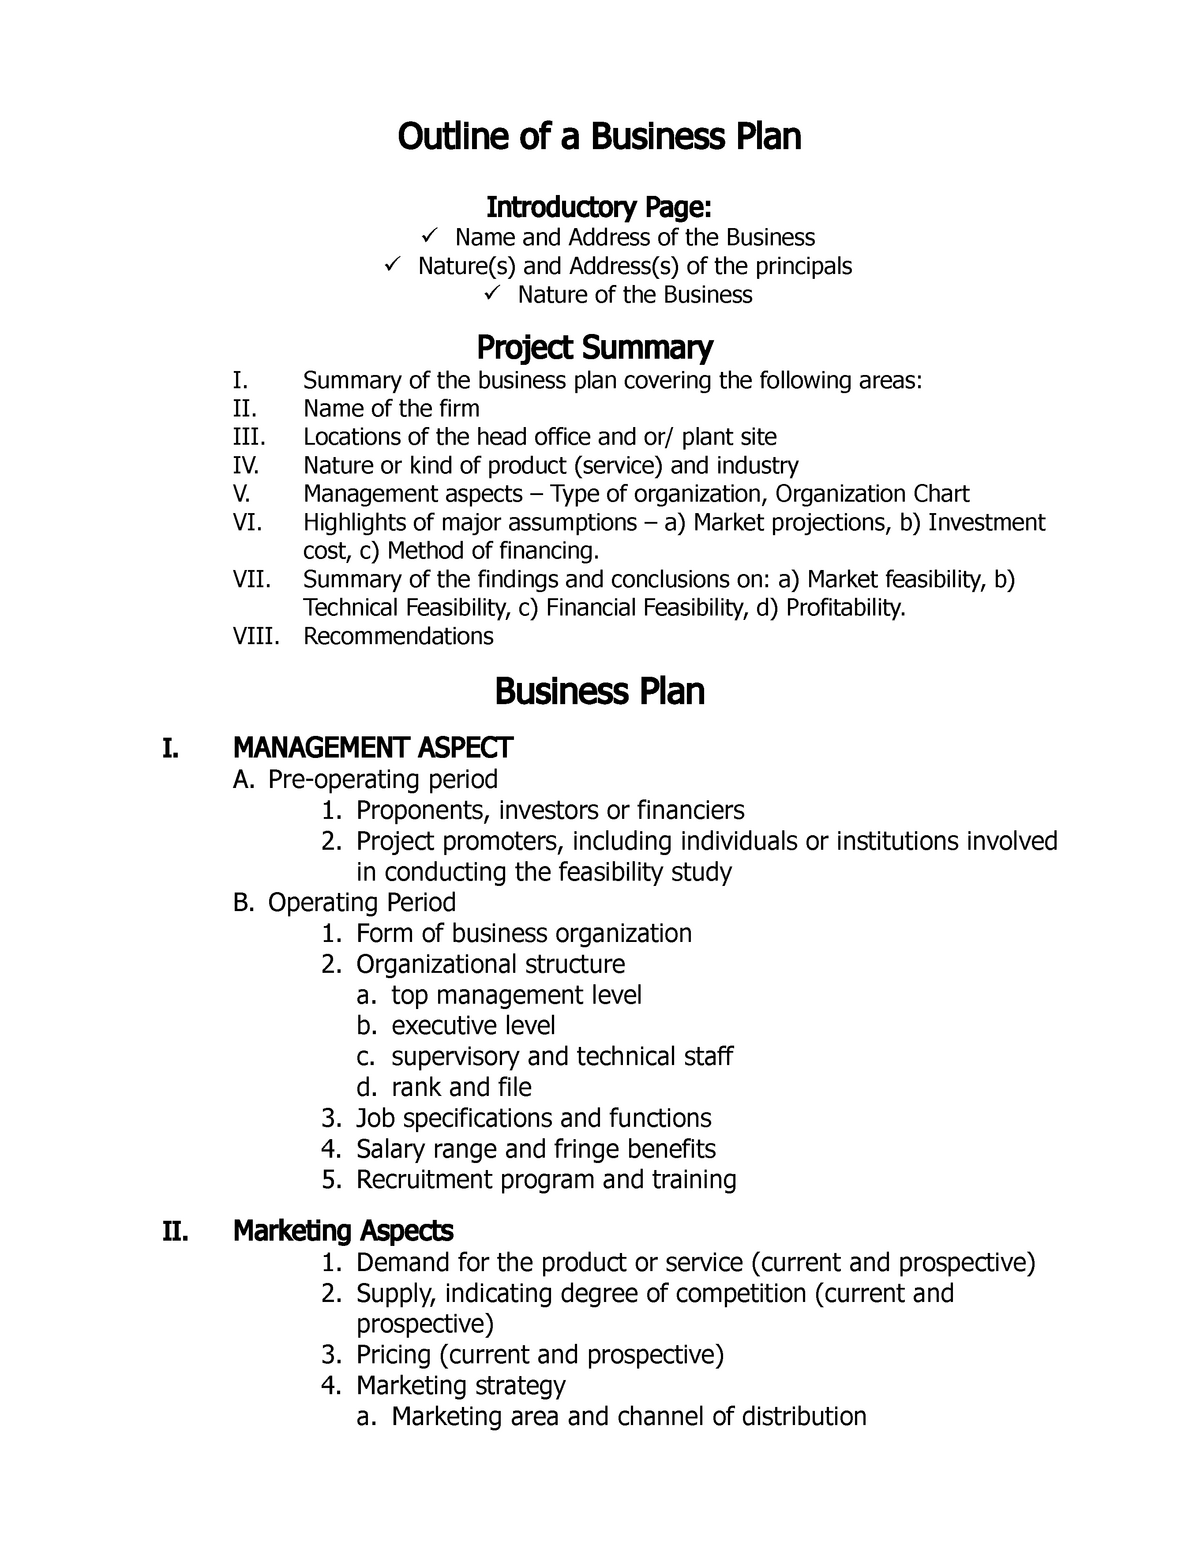 outline-of-a-business-plan-outline-of-a-business-plan-introductory